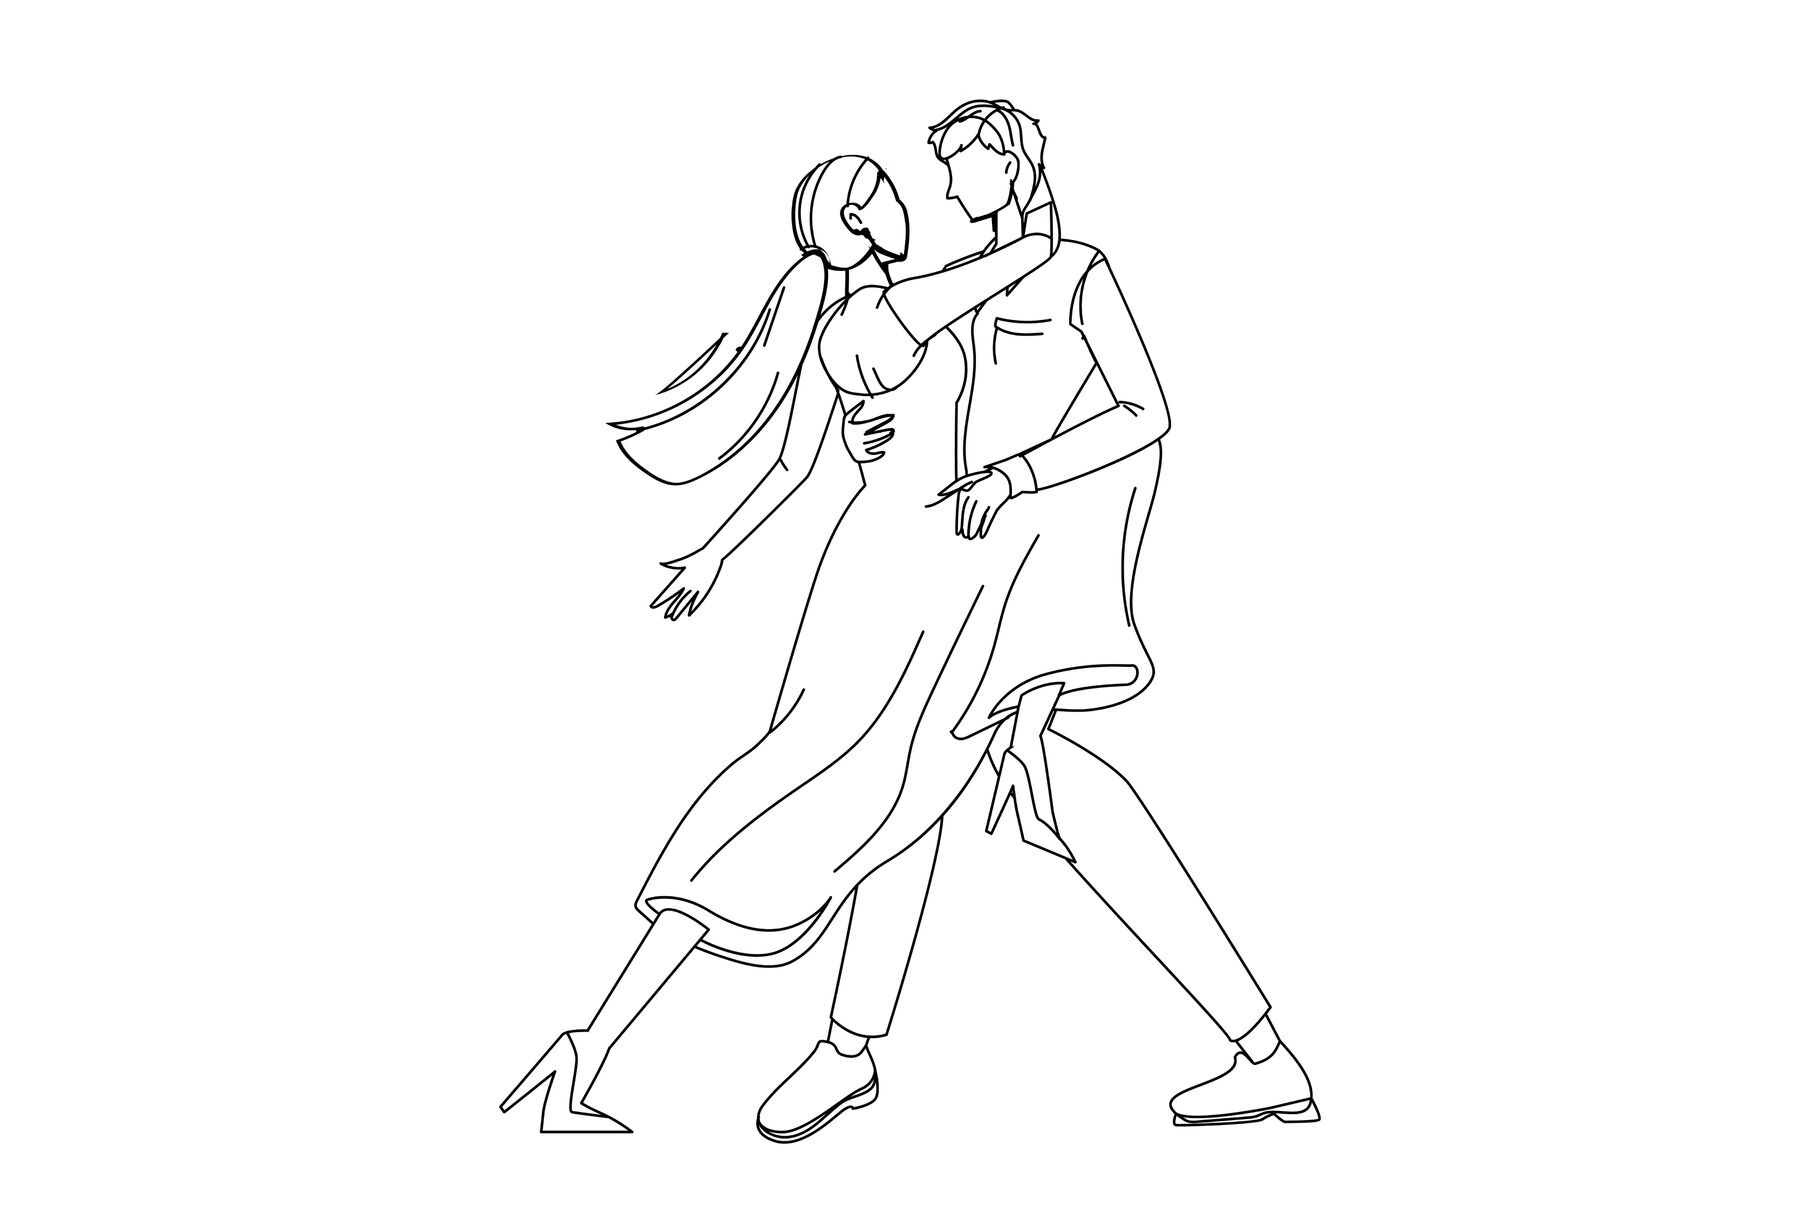 Dancing Couple (Rough Sketch) by Conyay on DeviantArt